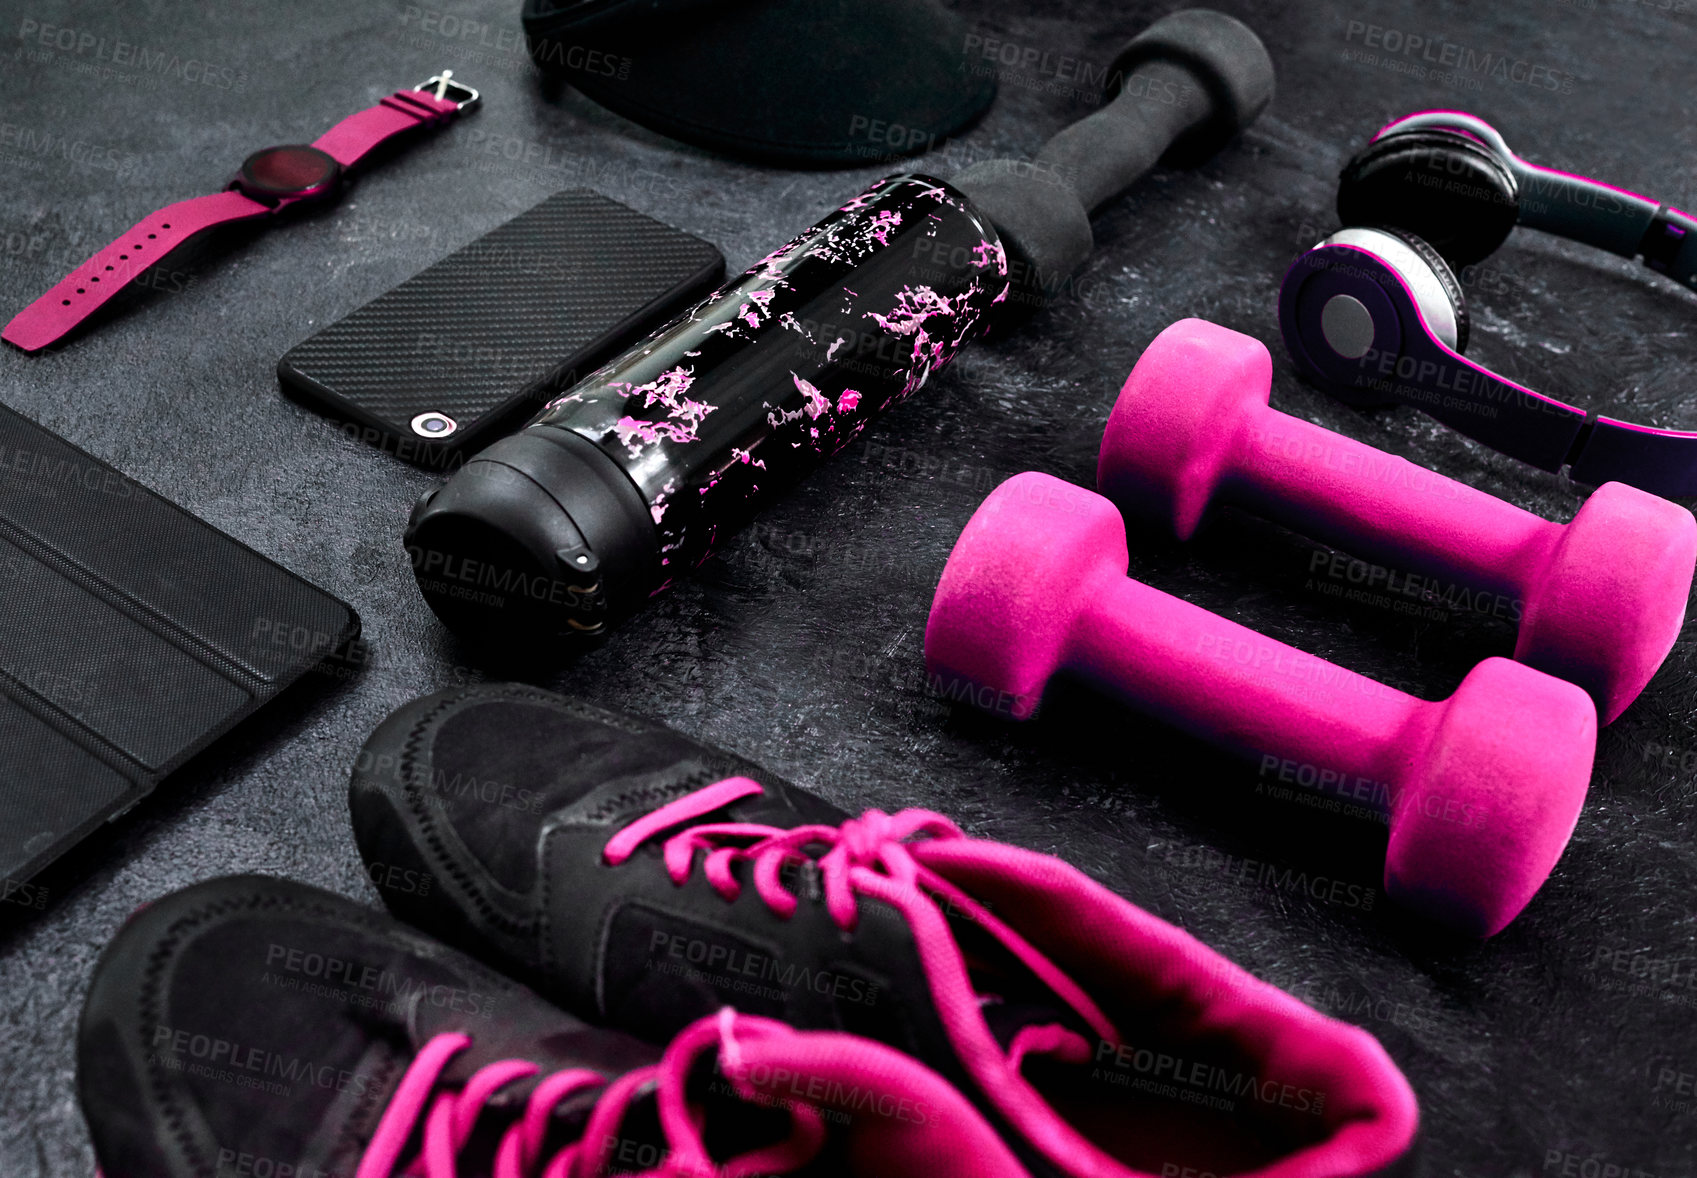 Buy stock photo High angle shot of a group of workout essentials lying on top of a dark background  inside of a studio